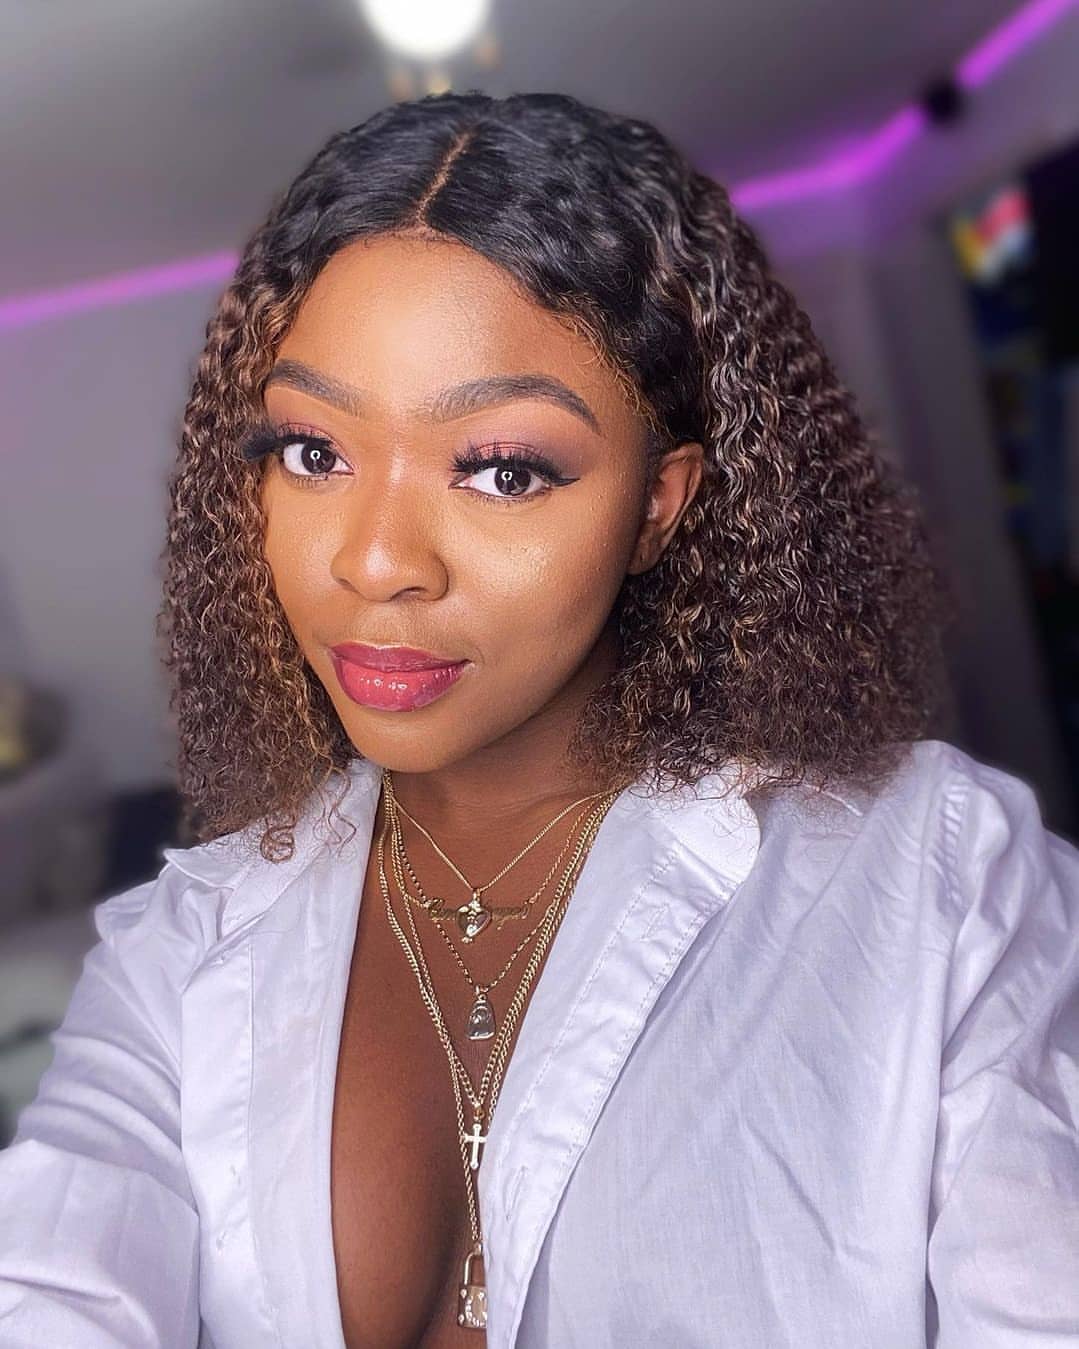 Peruzzi is reportedly dating